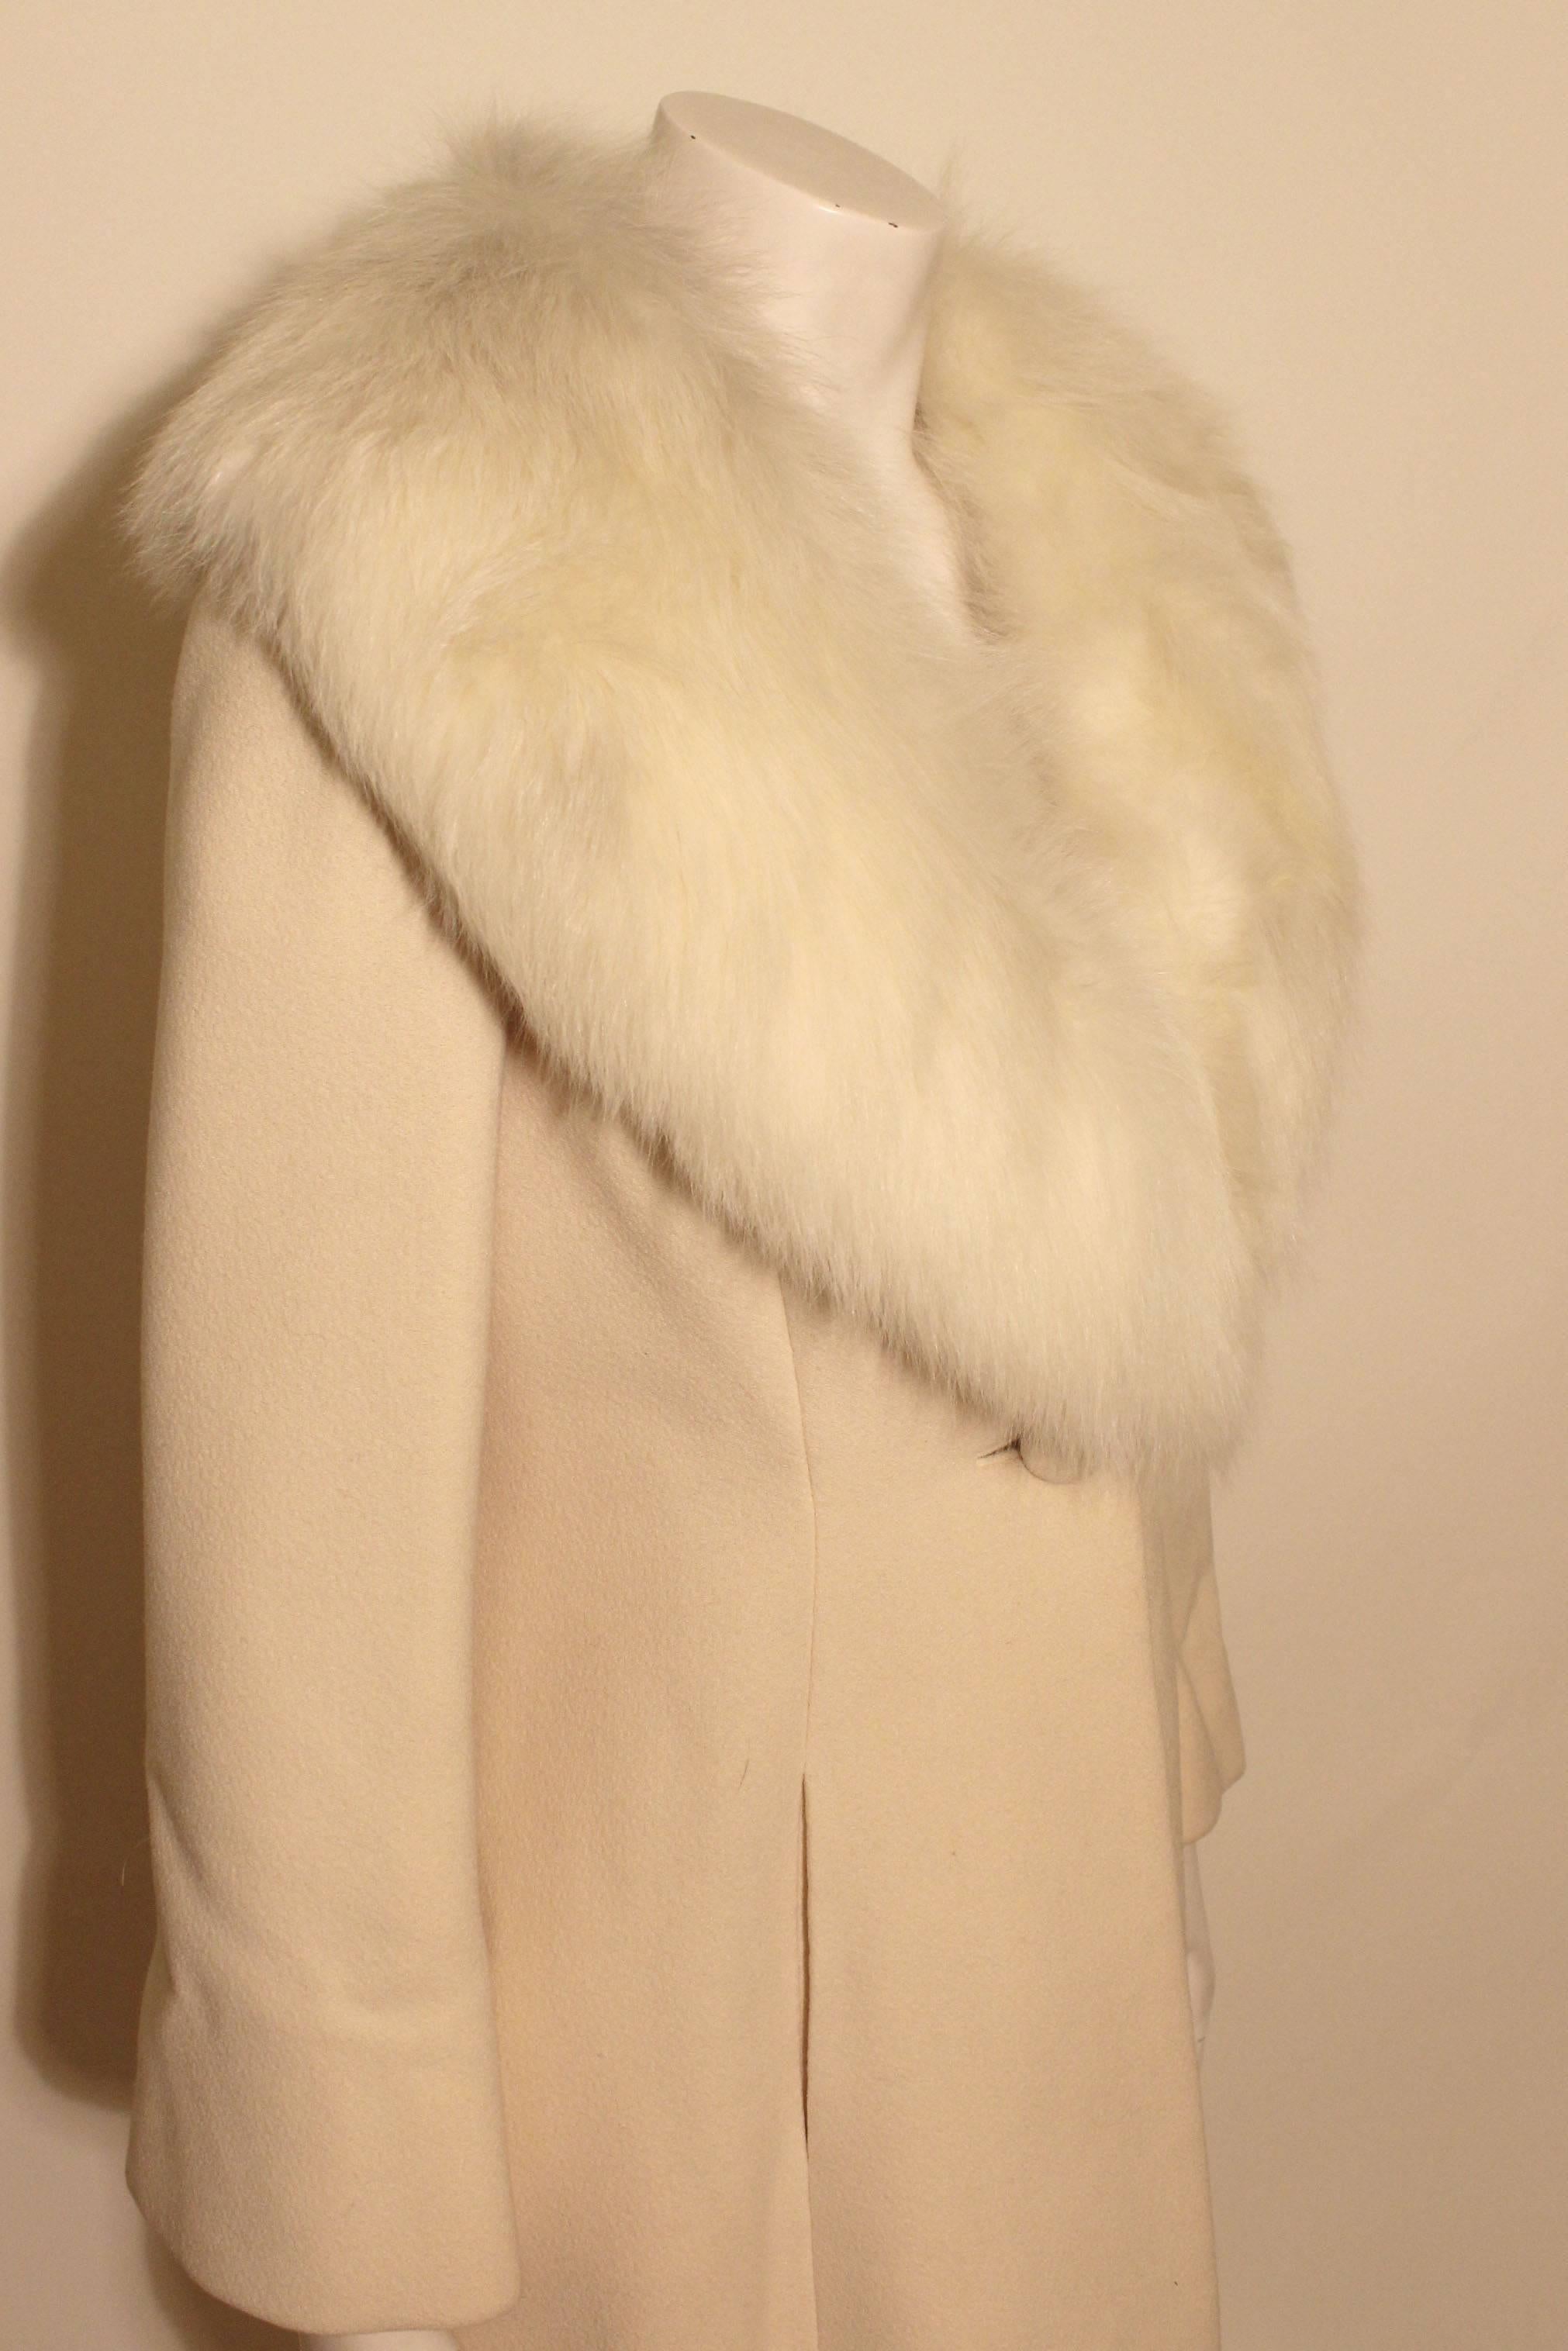 Vintage Pauline Trigere Coat with White Fox Collar 1